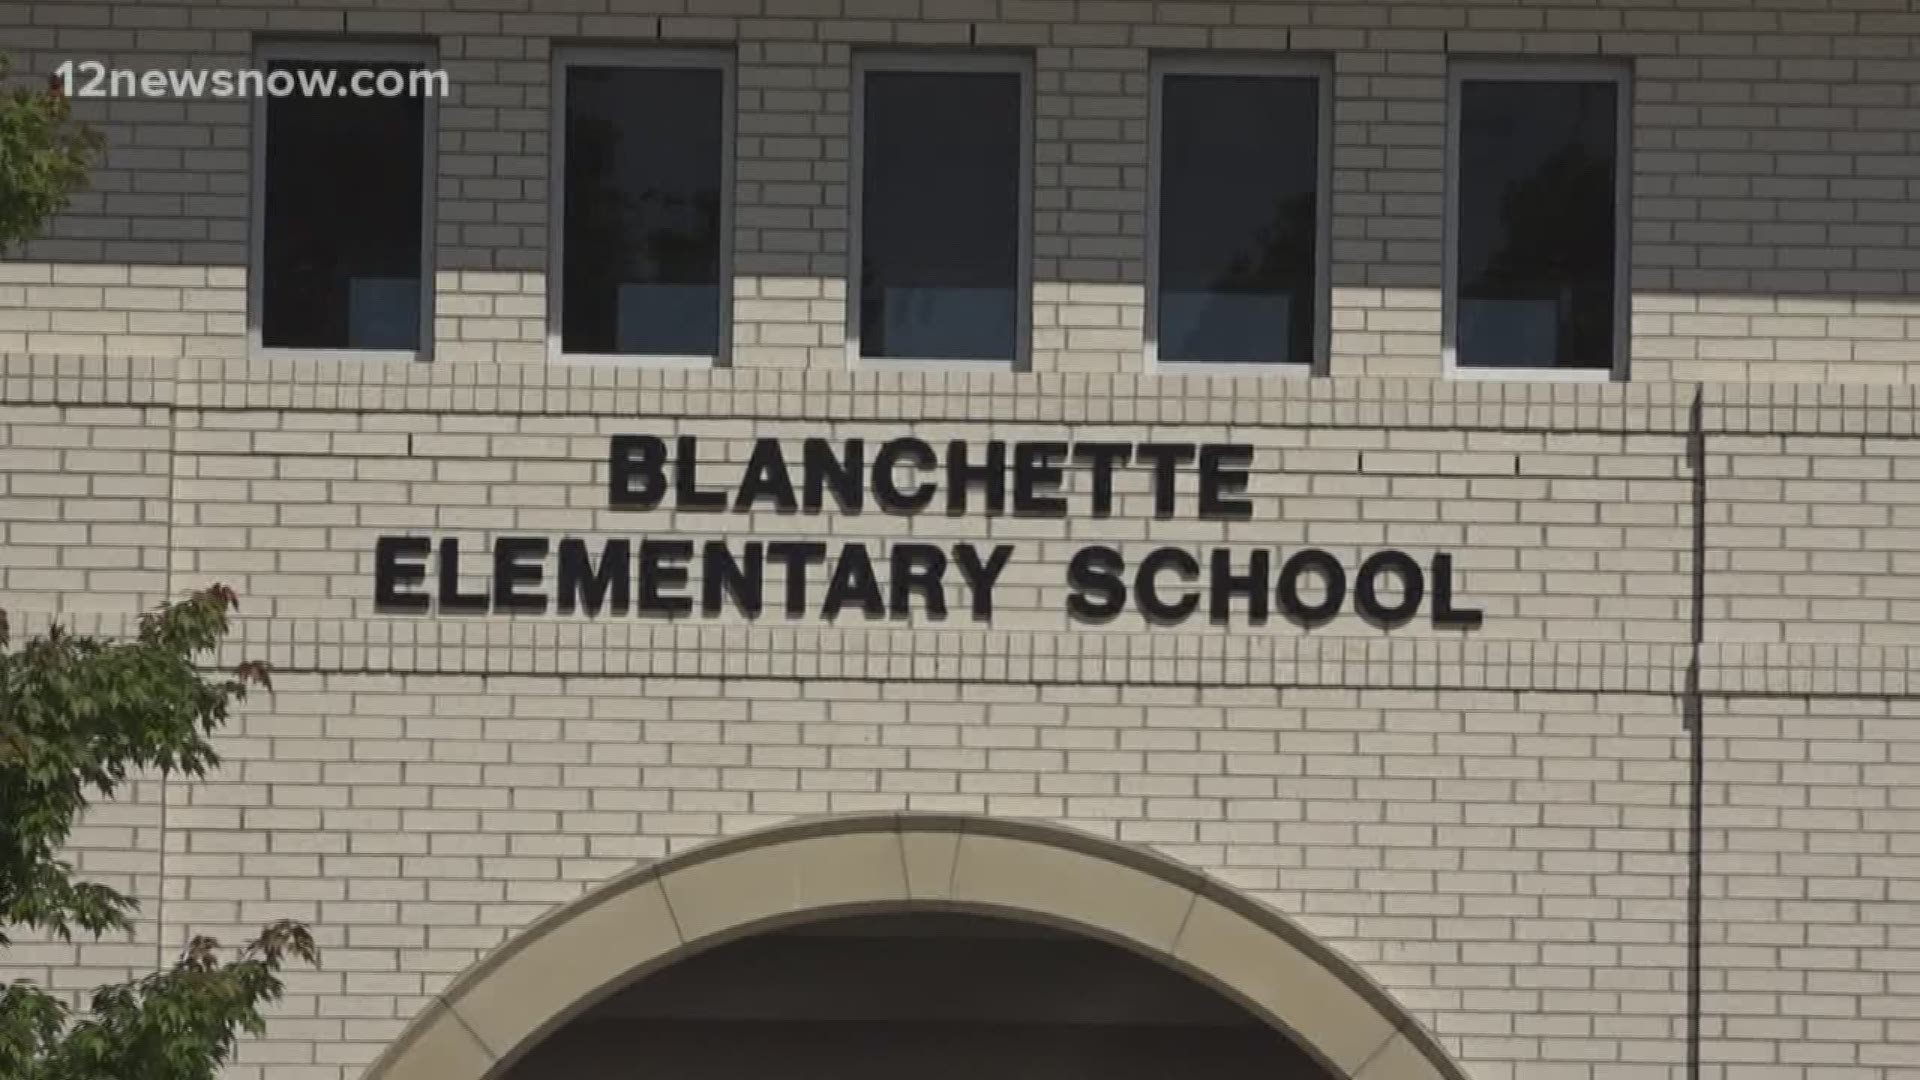 Three Beaumont elementary school students escape attempted kidnapping Monday afternoon